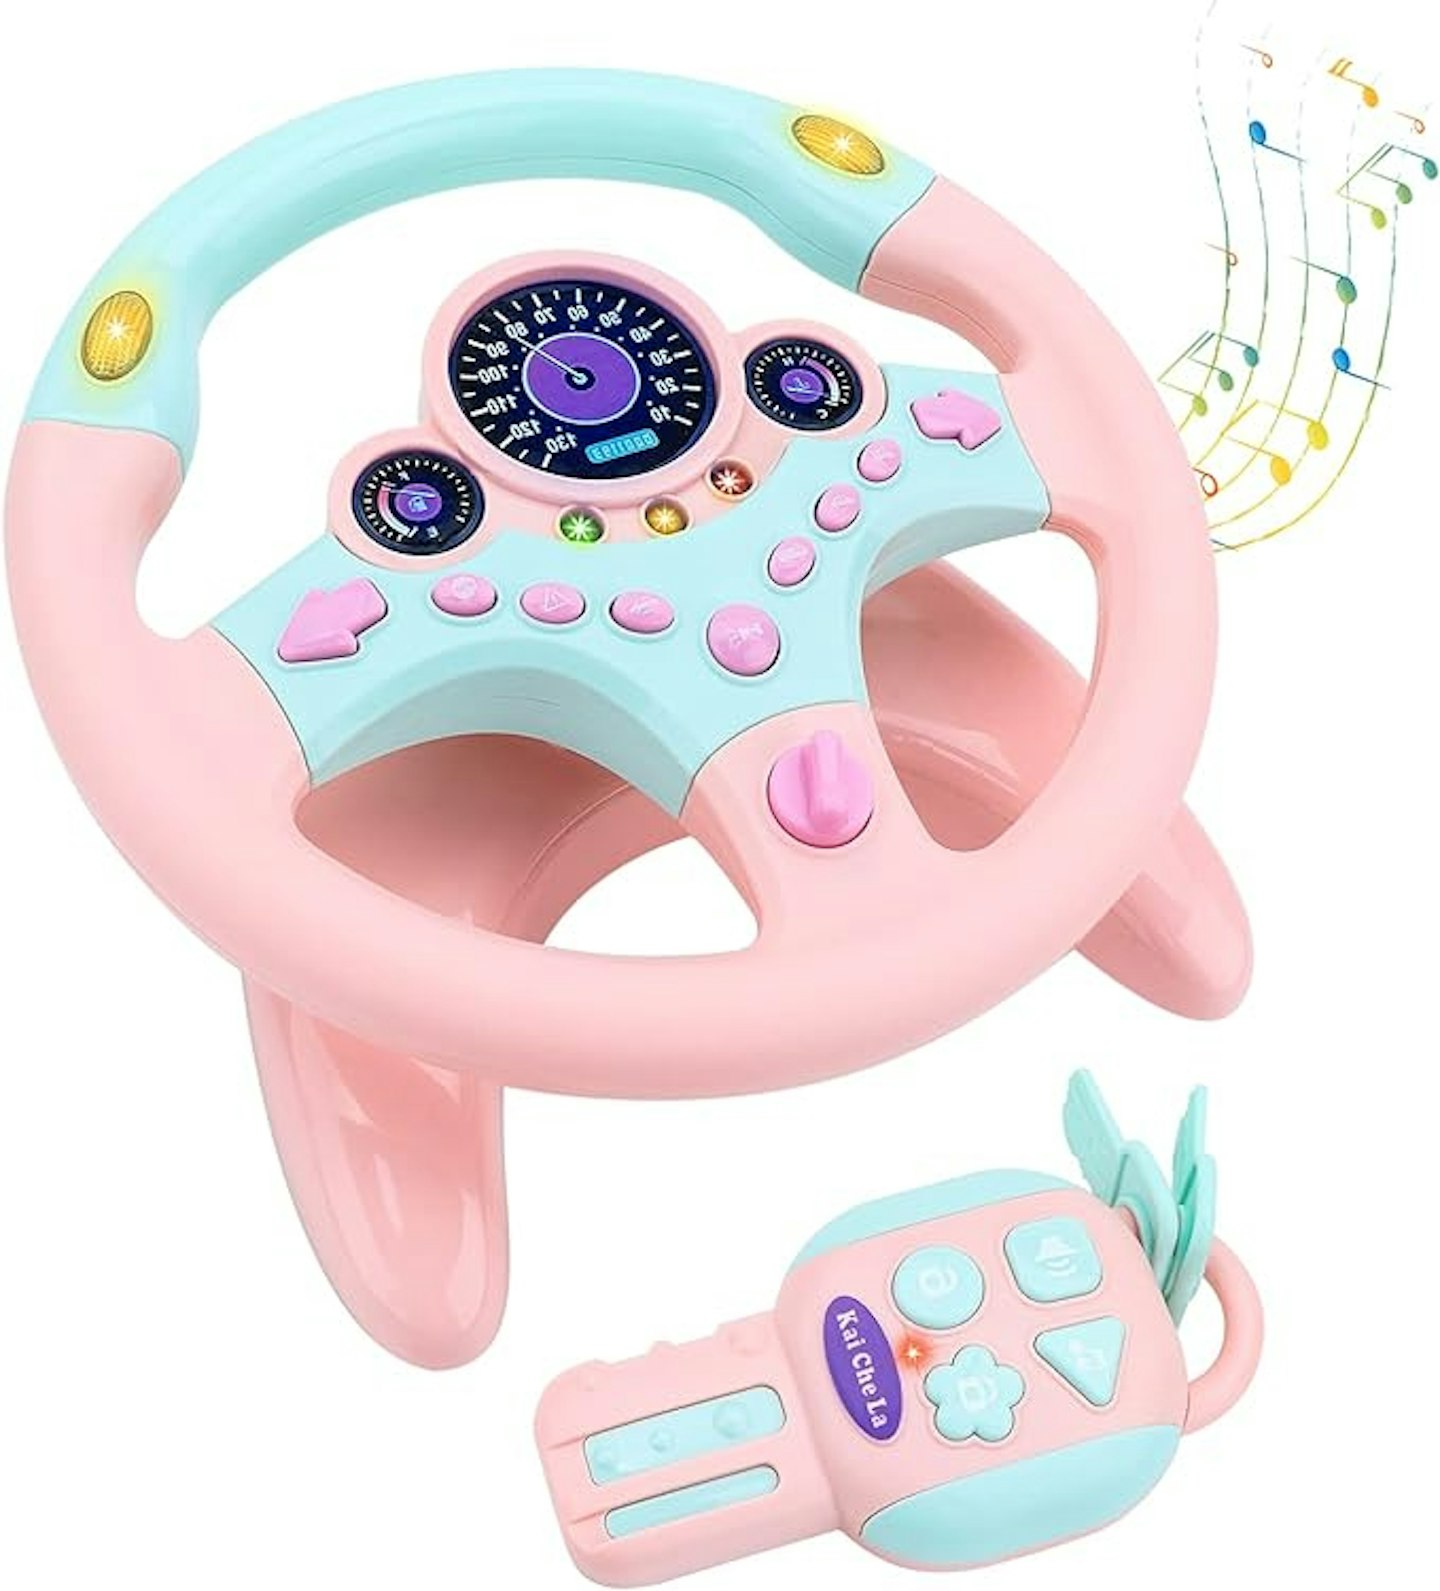 deAO Car Backseat Pretend Simulated Driving Steering Wheel Toy